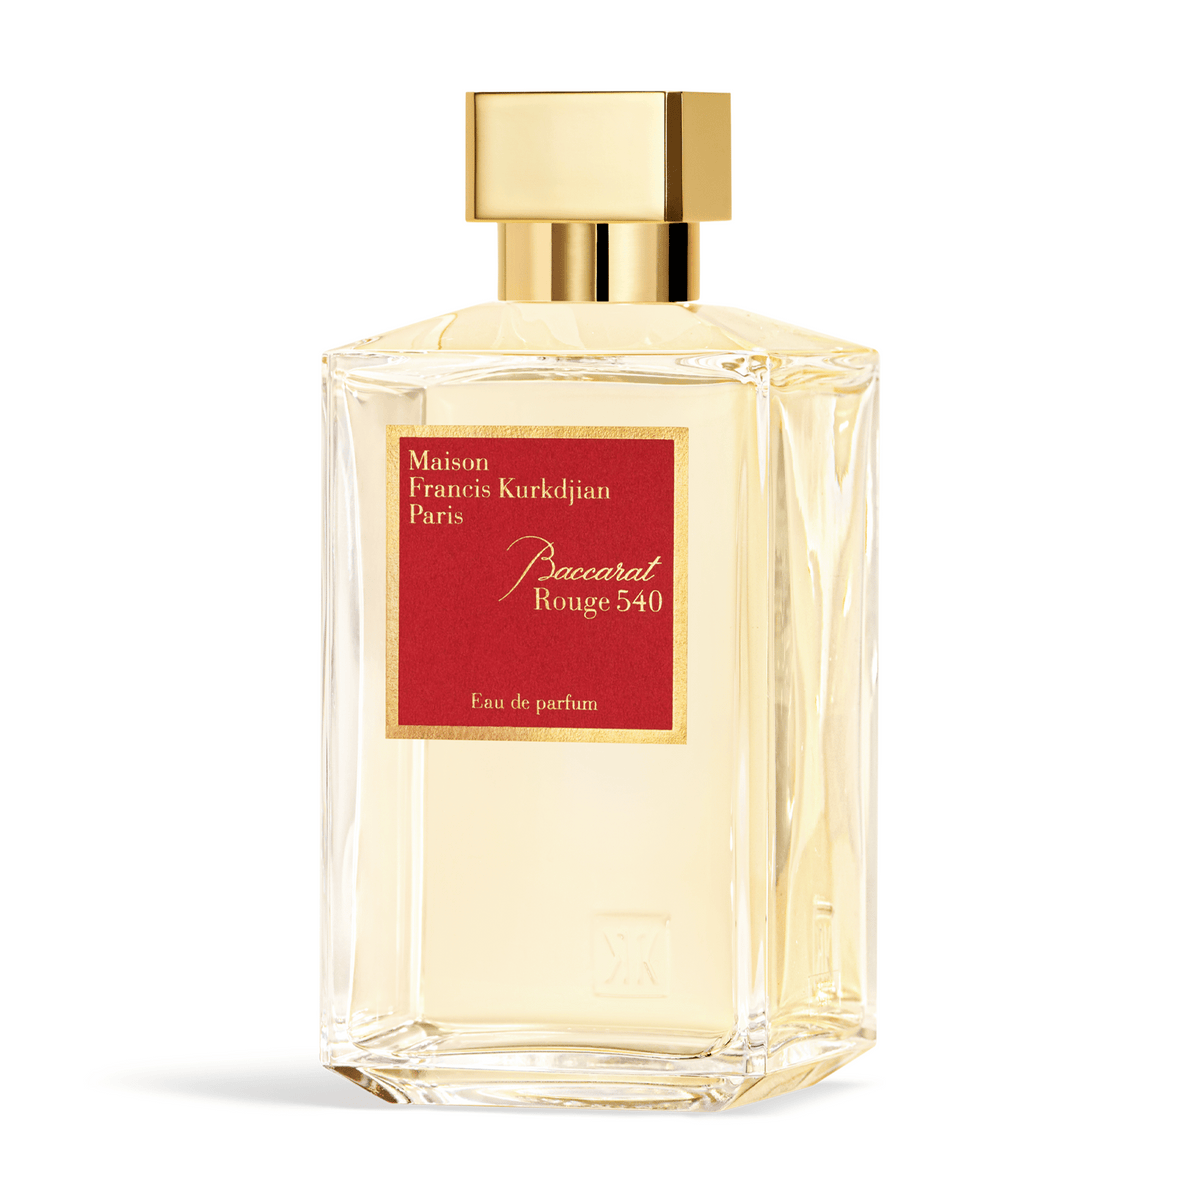 Primary Image of Baccarat Rouge EDP 540